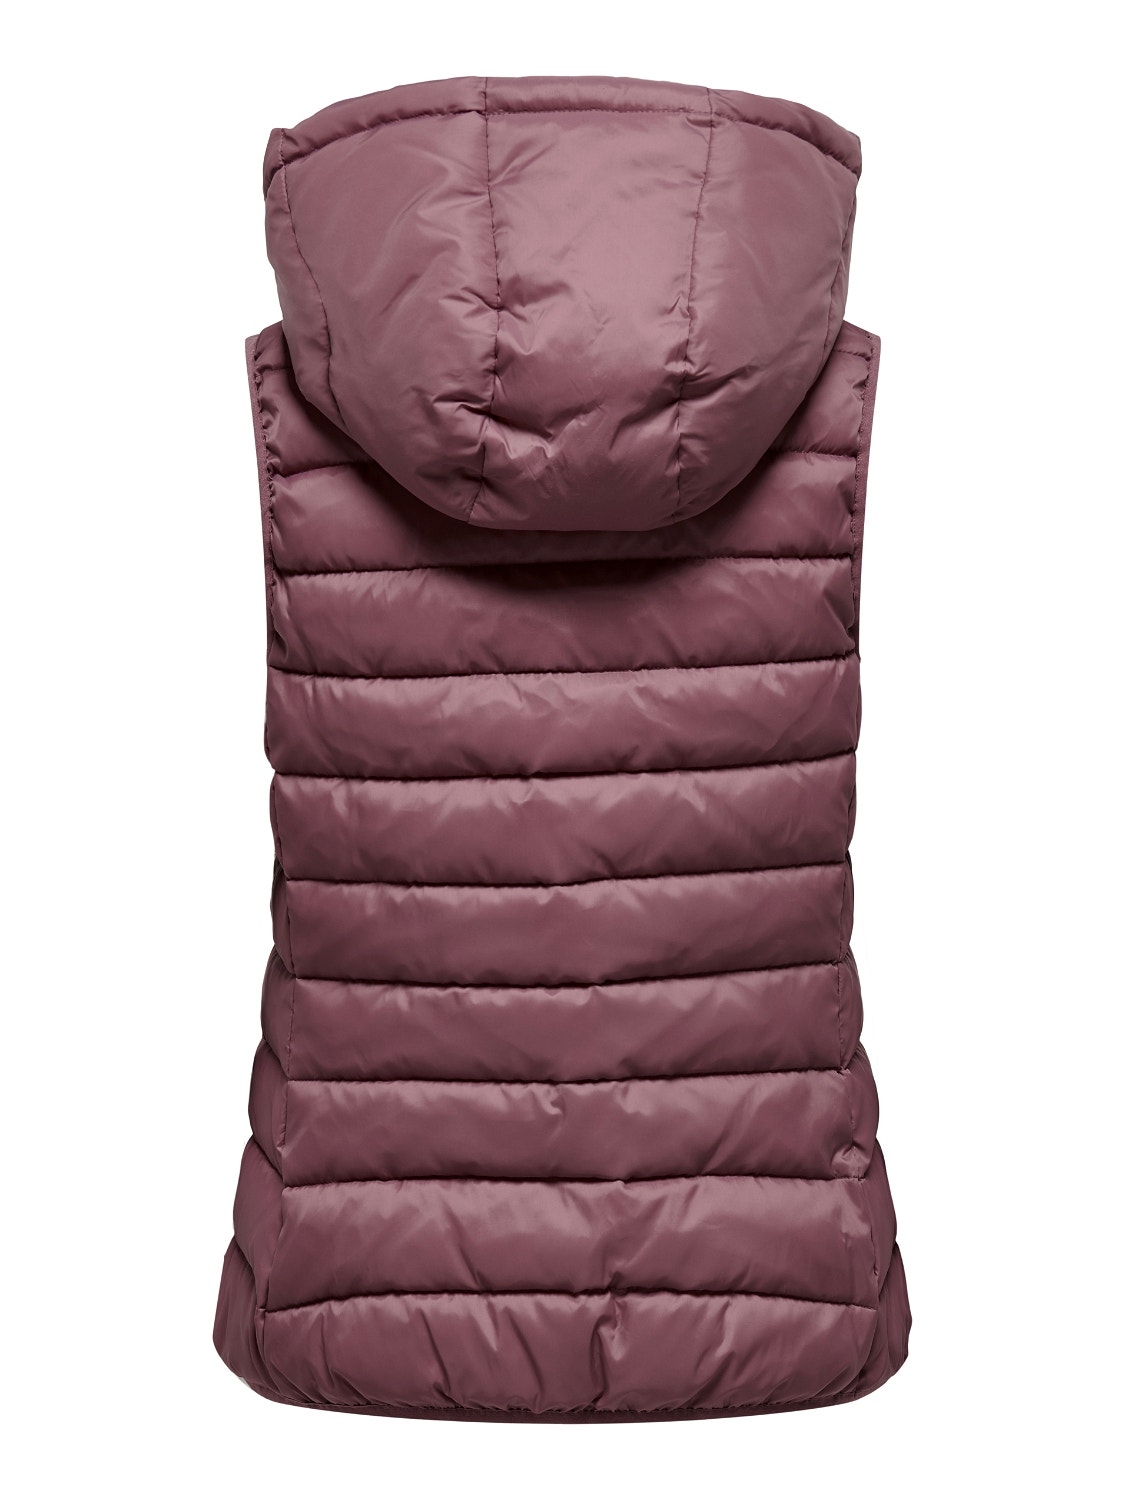 ONLY Gilets anti-froid Col montant haut -Rose Brown - 15205760